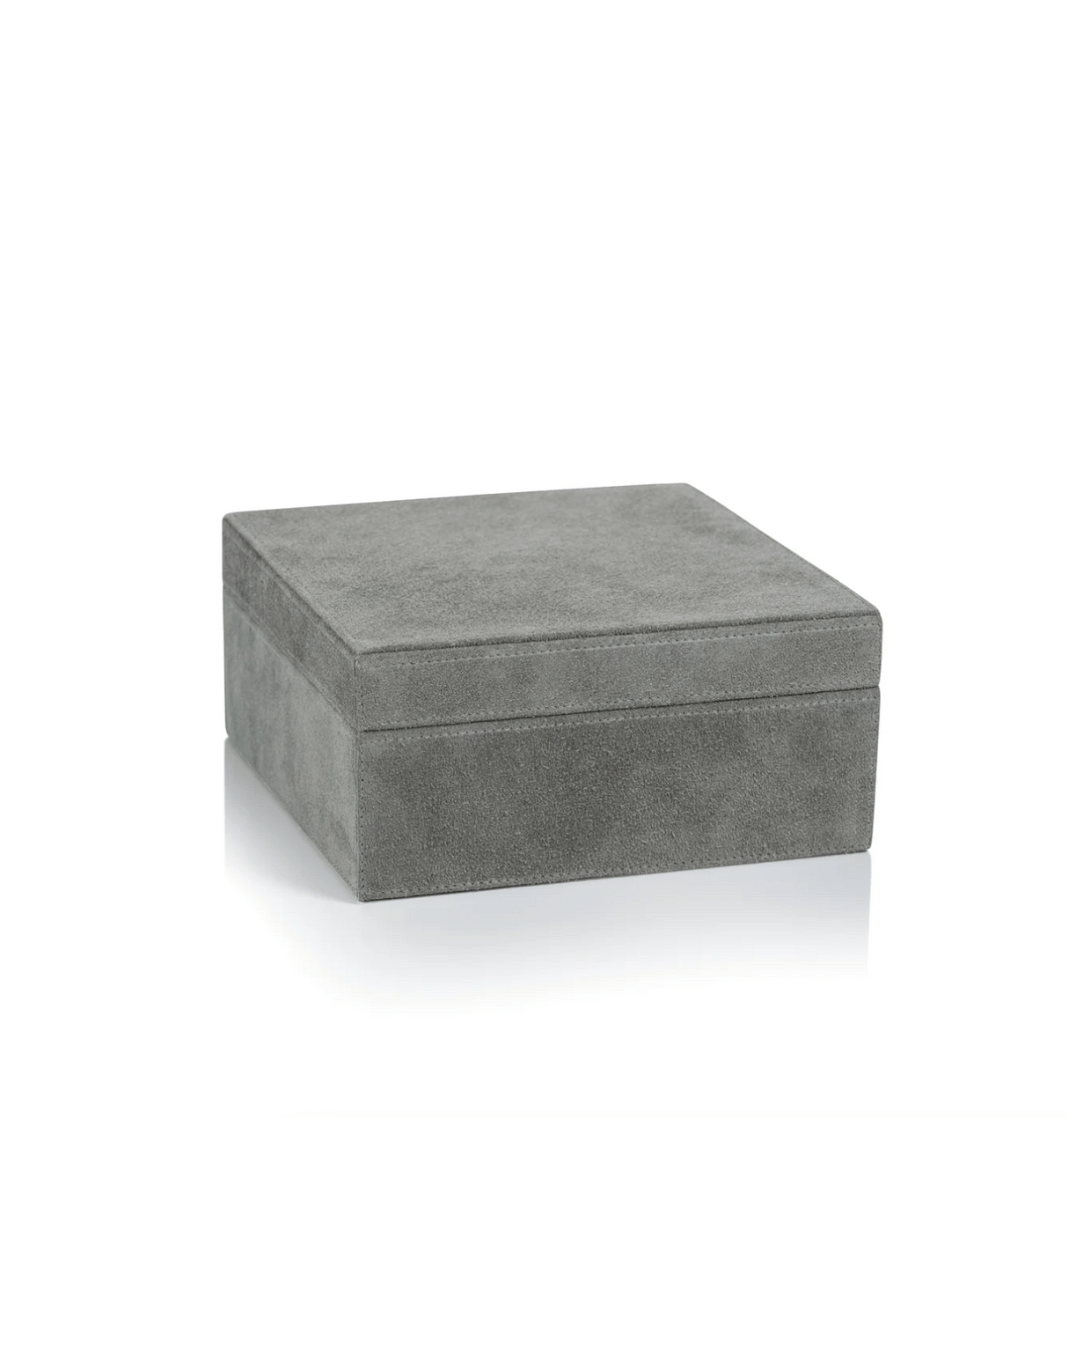 A simple rectangular grey velvet Zodax Suede Lux Box on a white background in a Scottsdale Arizona bungalow.